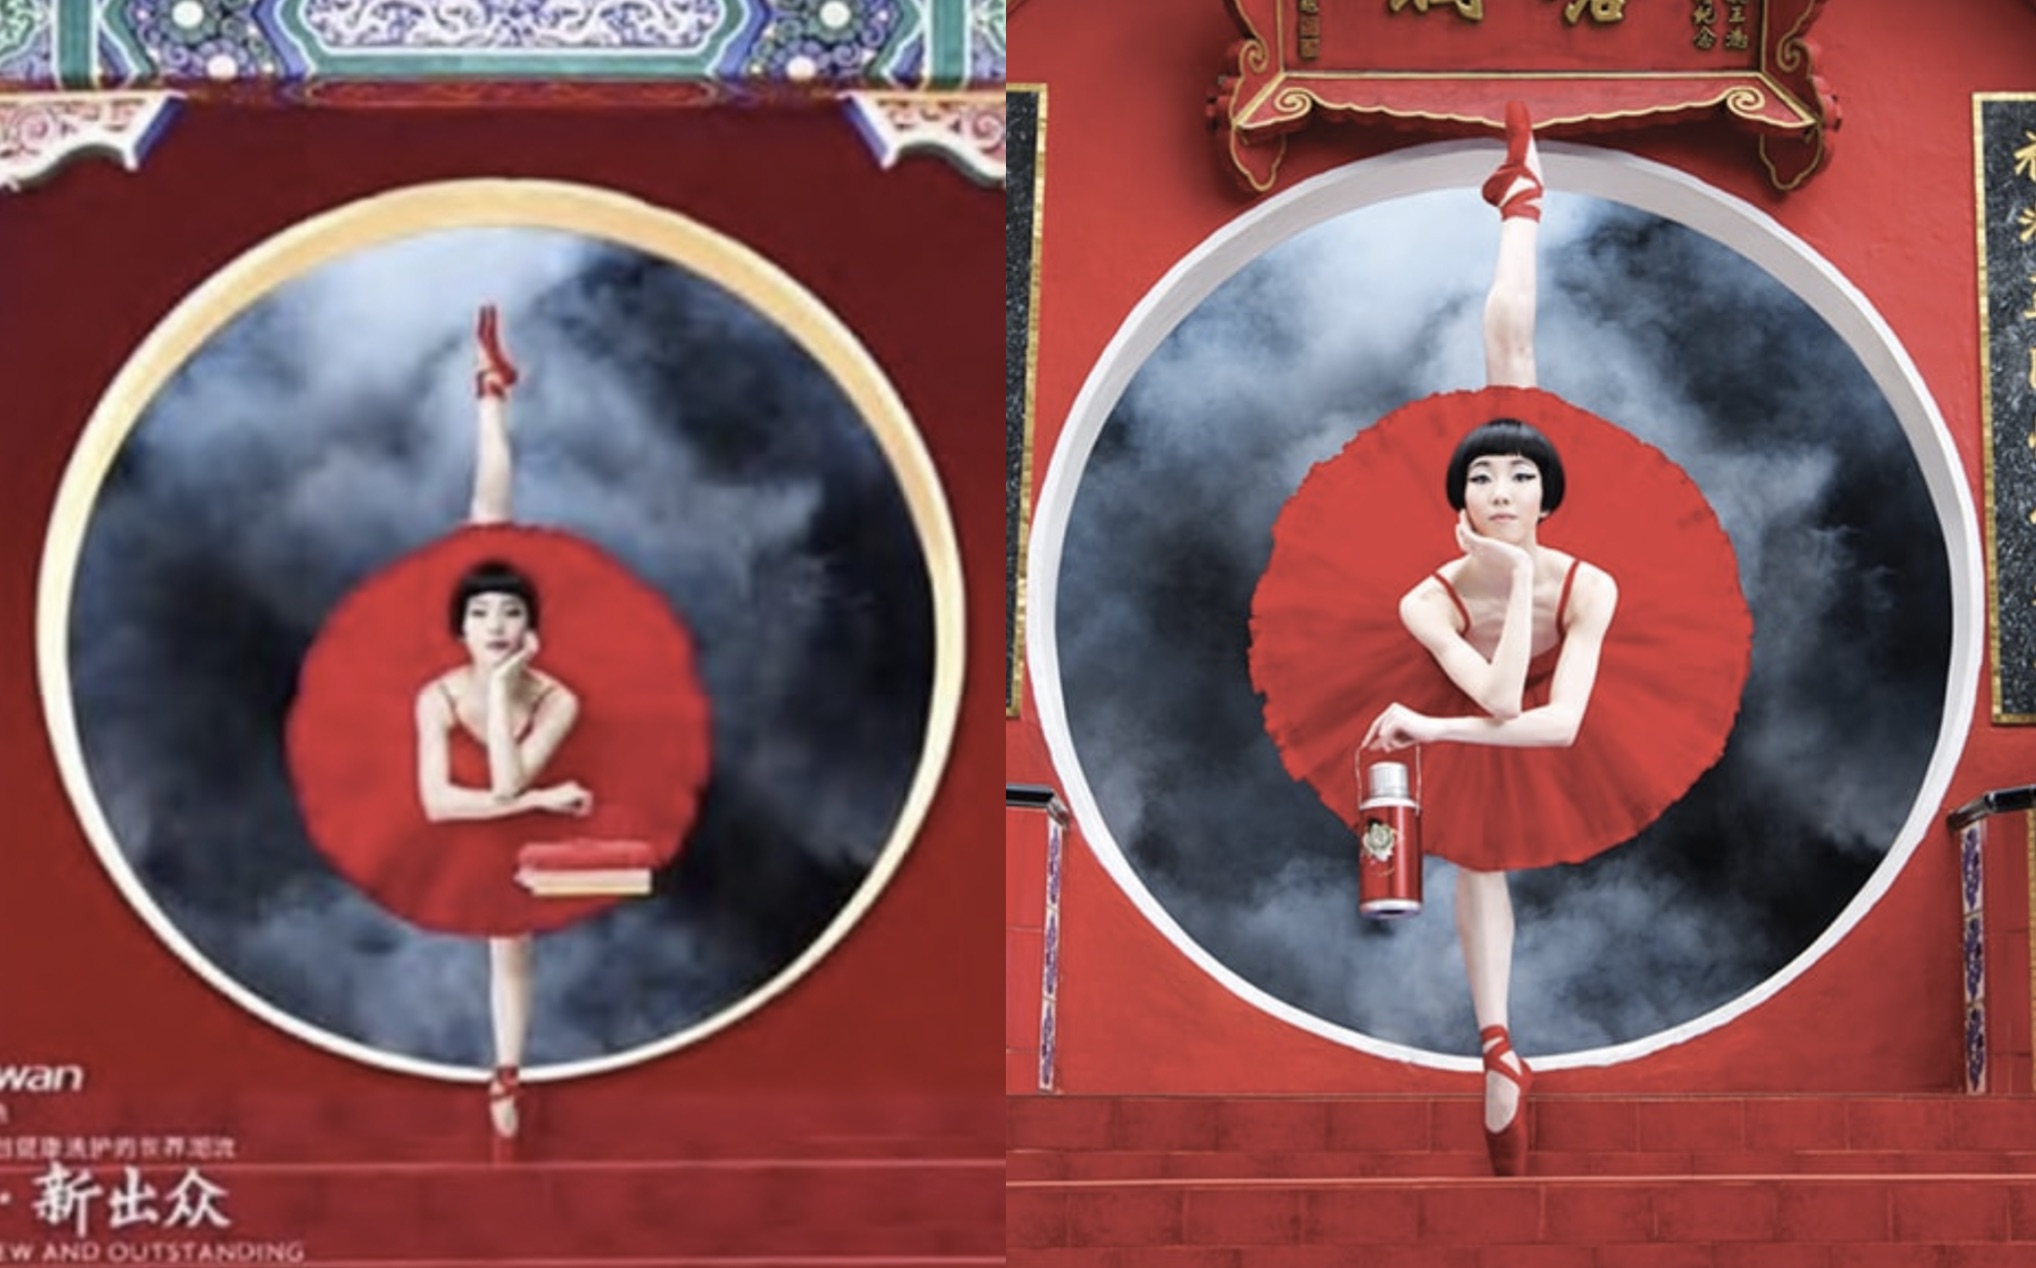 A side-by-side comparison of an ad by washing machine manufacturer Little Swan (left) and an ad for the Hong Kong Ballet (right) produced almost a year earlier. Photos via Instagram.